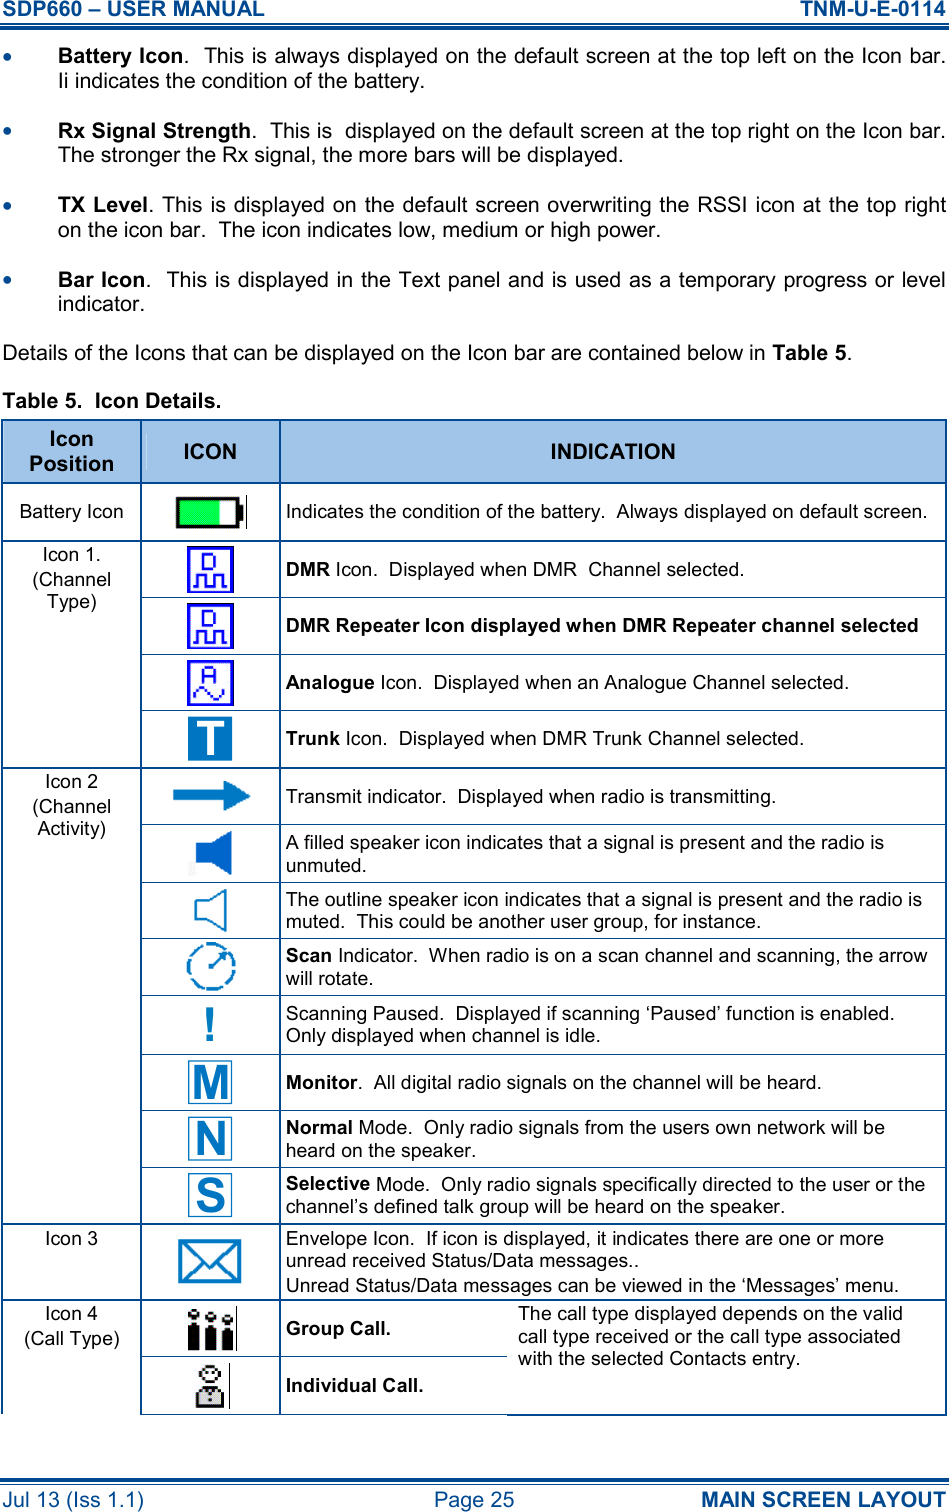 SDP660 – USER MANUAL  TNM-U-E-0114 Jul 13 (Iss 1.1)  Page 25  MAIN SCREEN LAYOUT •  Battery Icon.  This is always displayed on the default screen at the top left on the Icon bar.  Ii indicates the condition of the battery. •  Rx Signal Strength.  This is  displayed on the default screen at the top right on the Icon bar.  The stronger the Rx signal, the more bars will be displayed. •  TX Level. This is displayed on the default screen overwriting the RSSI icon at the top right on the icon bar.  The icon indicates low, medium or high power. •  Bar Icon.  This is displayed in the Text panel and is used as a temporary progress or level indicator. Details of the Icons that can be displayed on the Icon bar are contained below in Table 5. Table 5.  Icon Details. Icon Position  ICON  INDICATION Battery Icon   Indicates the condition of the battery.  Always displayed on default screen.  DMR Icon.  Displayed when DMR  Channel selected.  DMR Repeater Icon displayed when DMR Repeater channel selected Icon 1. (Channel Type)  Analogue Icon.  Displayed when an Analogue Channel selected.  T Trunk Icon.  Displayed when DMR Trunk Channel selected.  Transmit indicator.  Displayed when radio is transmitting. Icon 2 (Channel Activity)  A filled speaker icon indicates that a signal is present and the radio is unmuted.   The outline speaker icon indicates that a signal is present and the radio is muted.  This could be another user group, for instance.   Scan Indicator.  When radio is on a scan channel and scanning, the arrow will rotate.  ! Scanning Paused.  Displayed if scanning ‘Paused’ function is enabled.  Only displayed when channel is idle.  M Monitor.  All digital radio signals on the channel will be heard.  N Normal Mode.  Only radio signals from the users own network will be heard on the speaker.  S Selective Mode.  Only radio signals specifically directed to the user or the channel’s defined talk group will be heard on the speaker. Icon 3  Envelope Icon.  If icon is displayed, it indicates there are one or more unread received Status/Data messages.. Unread Status/Data messages can be viewed in the ‘Messages’ menu. Icon 4 (Call Type)   Group Call.   Individual Call. The call type displayed depends on the valid call type received or the call type associated with the selected Contacts entry. 